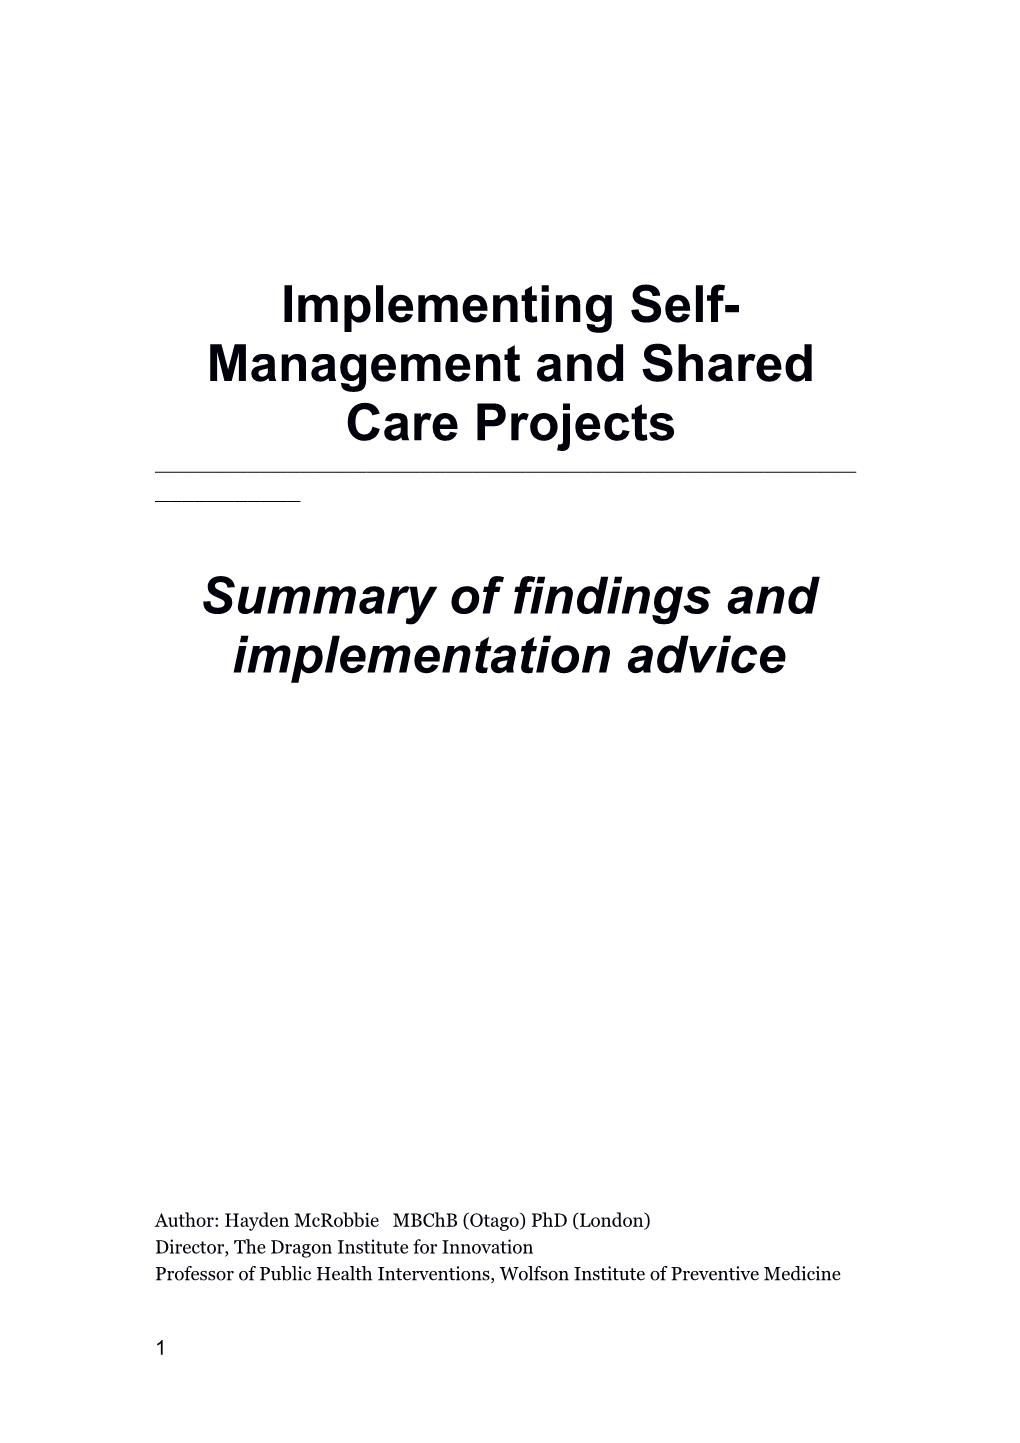 Implementing Self-Management and Shared Care Projects: Summary of Findings and Implementation